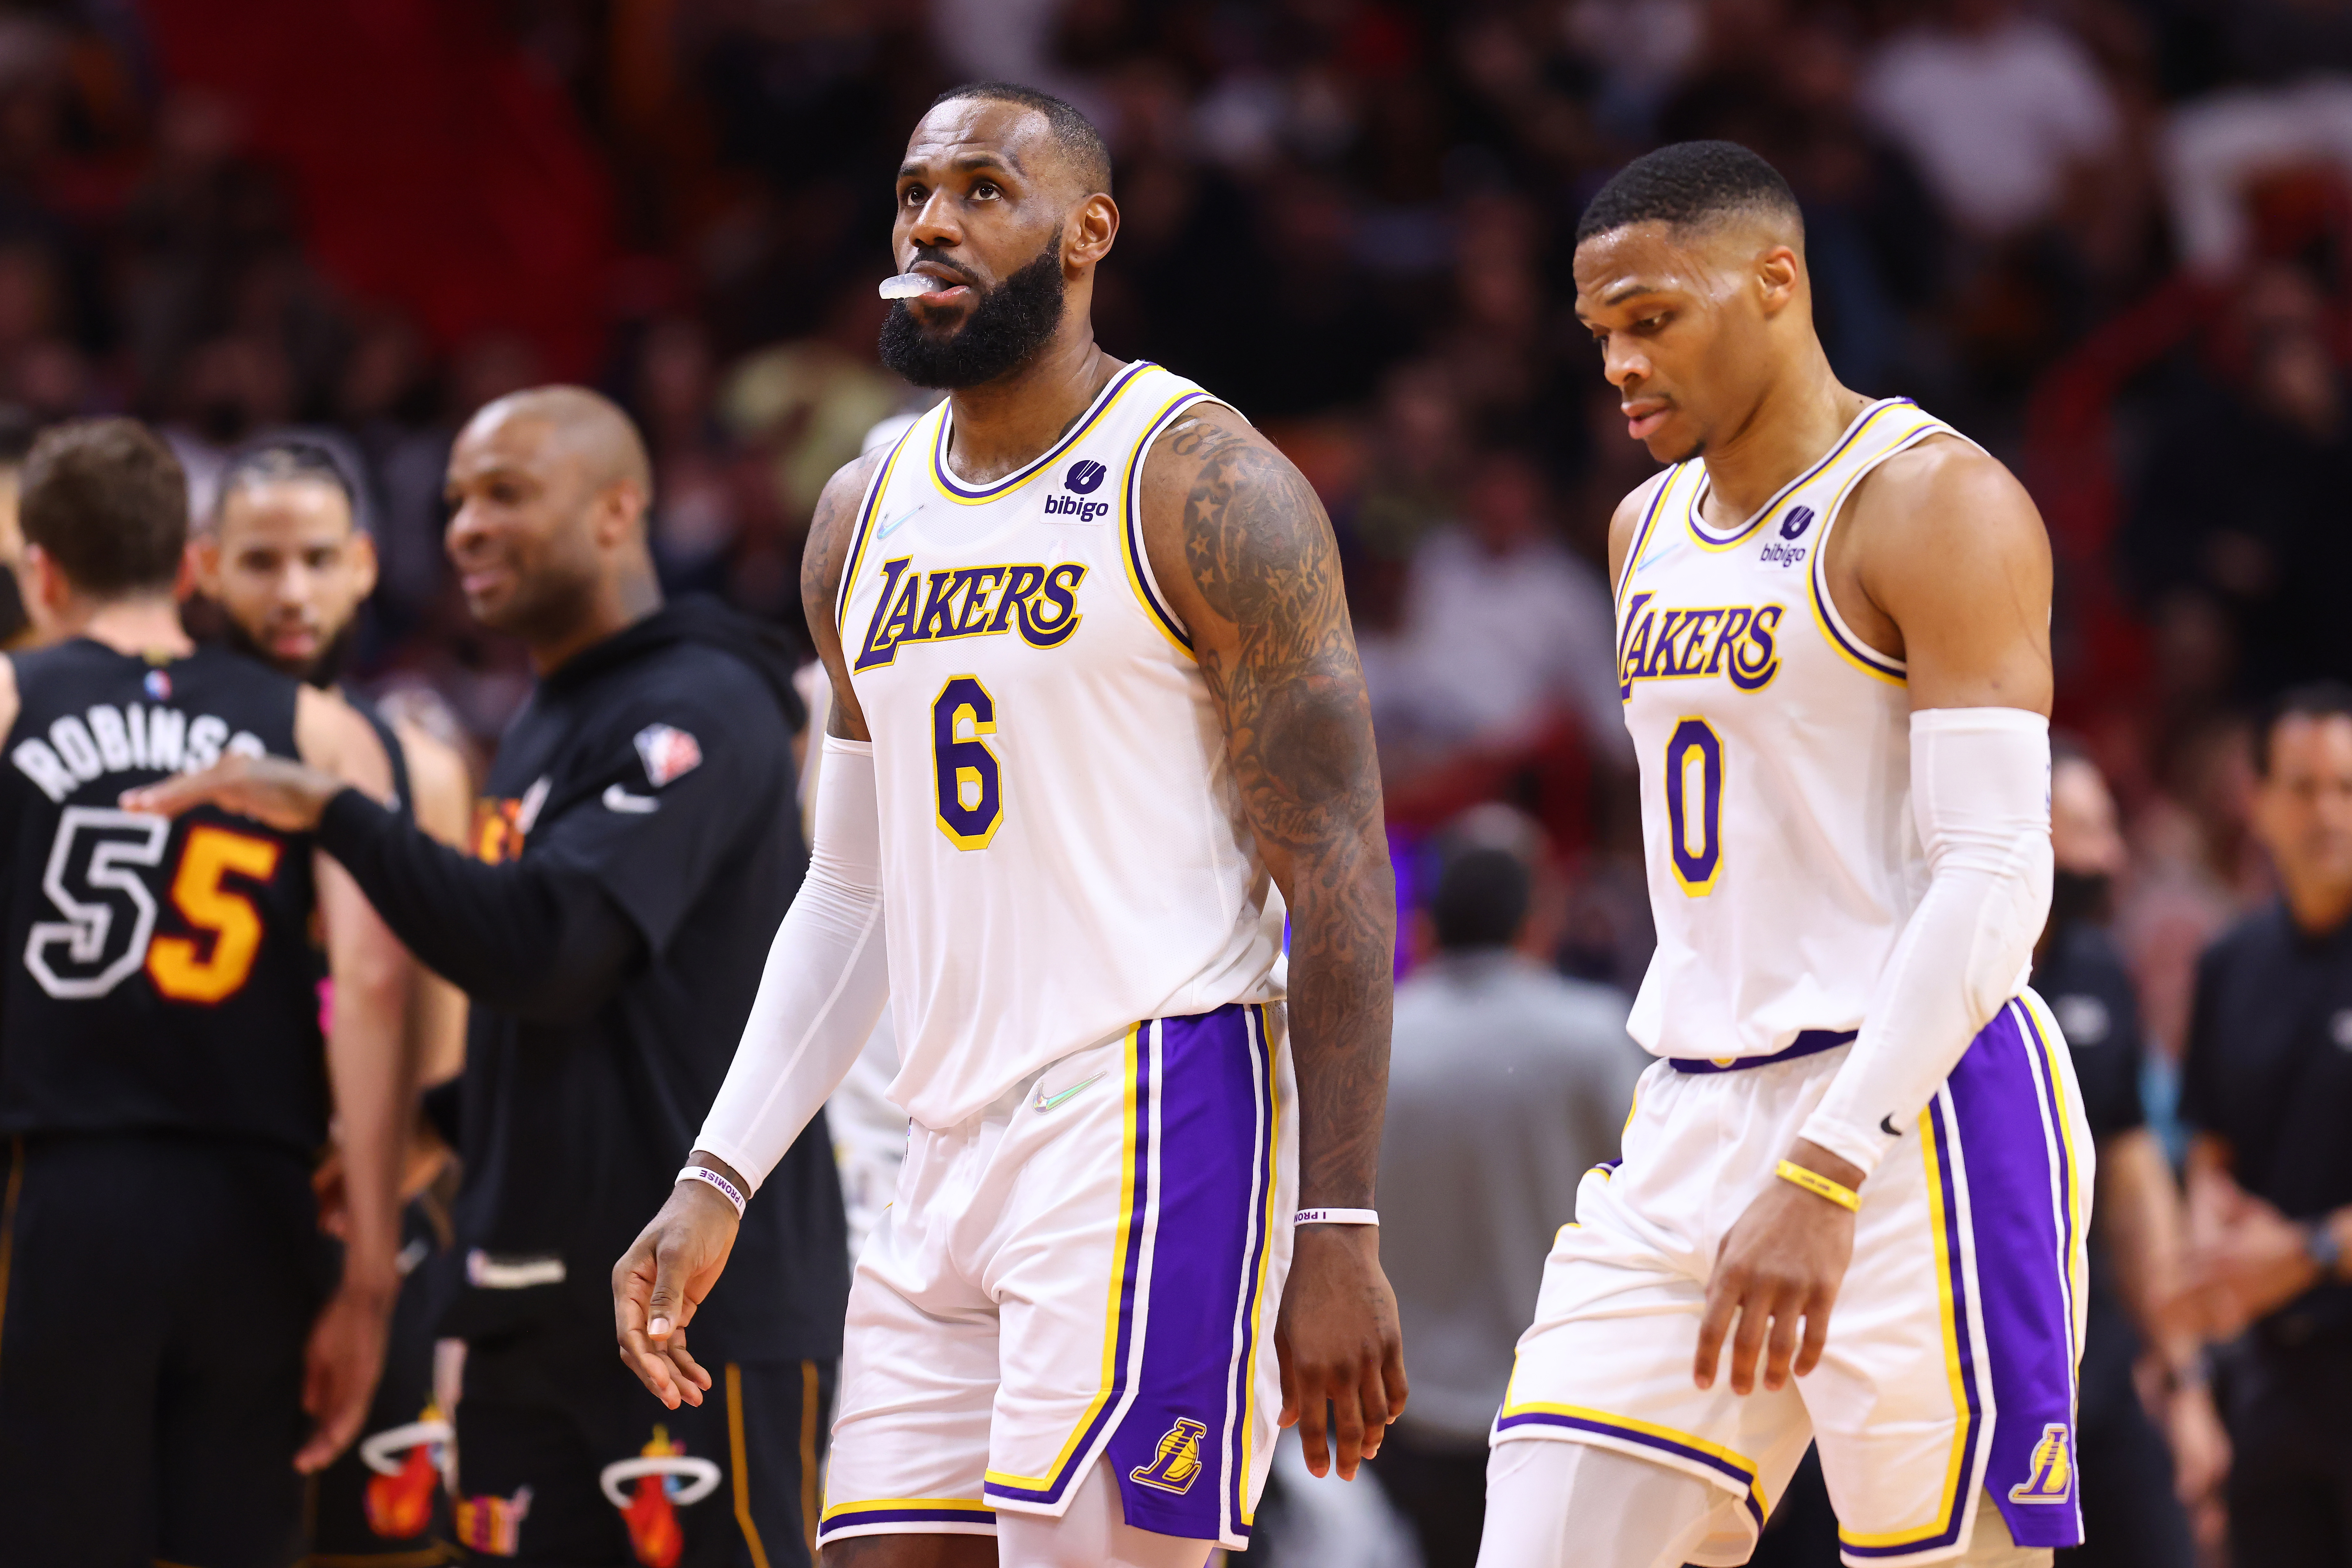 LeBron James #6 and Russell Westbrook #0 of the Los Angeles Lakers react against the Miami Heat during the first half at FTX Arena on January 23, 2022 in Miami, Florida.